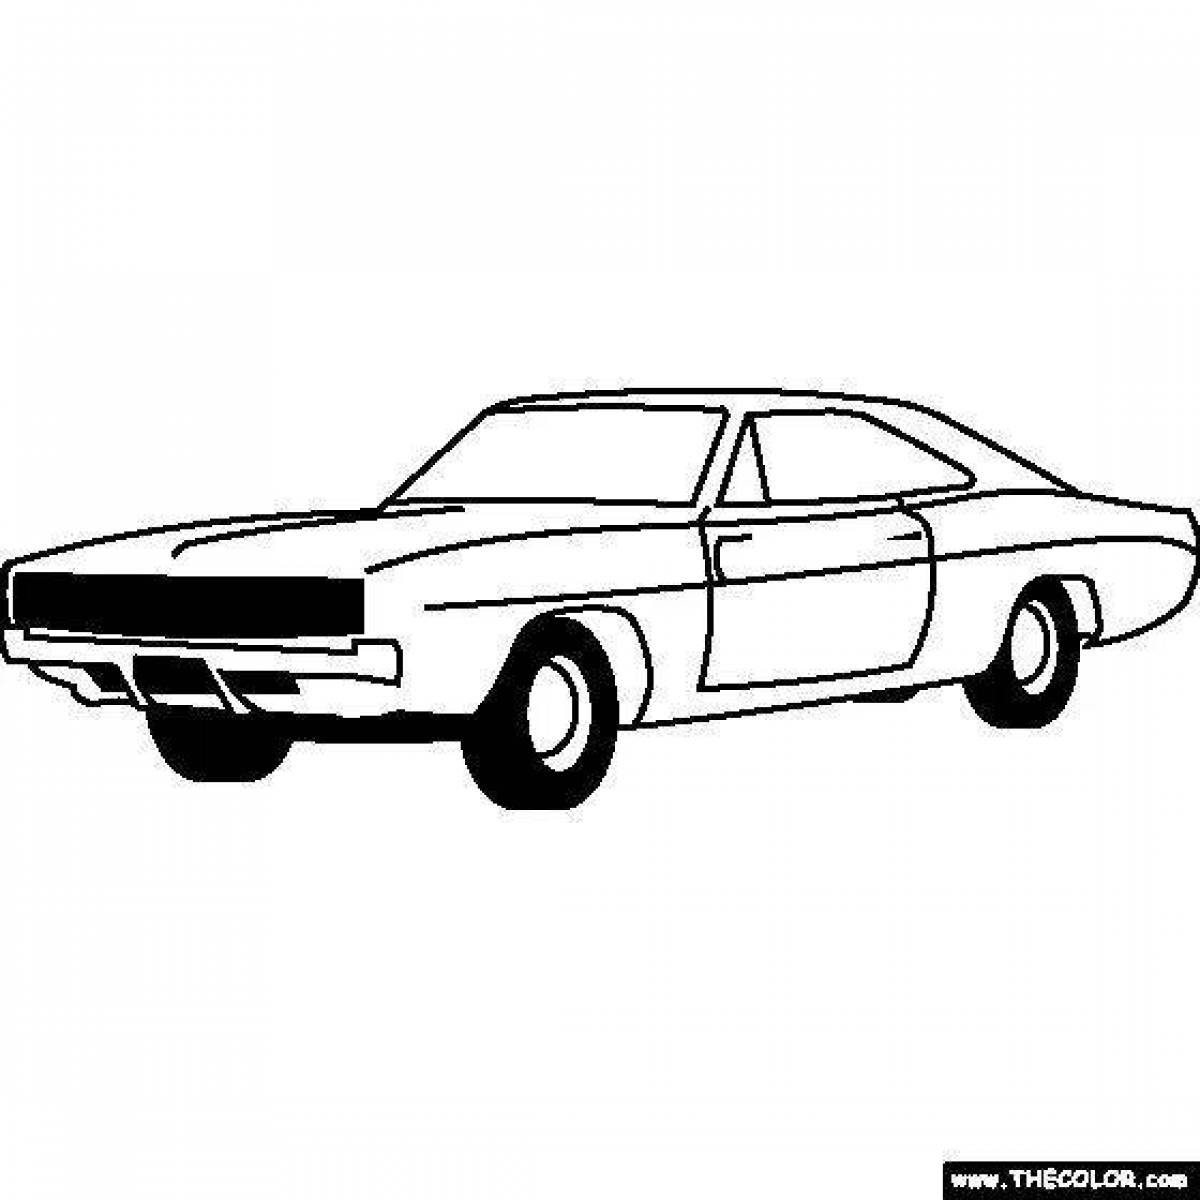 Adorable dodge charger coloring page